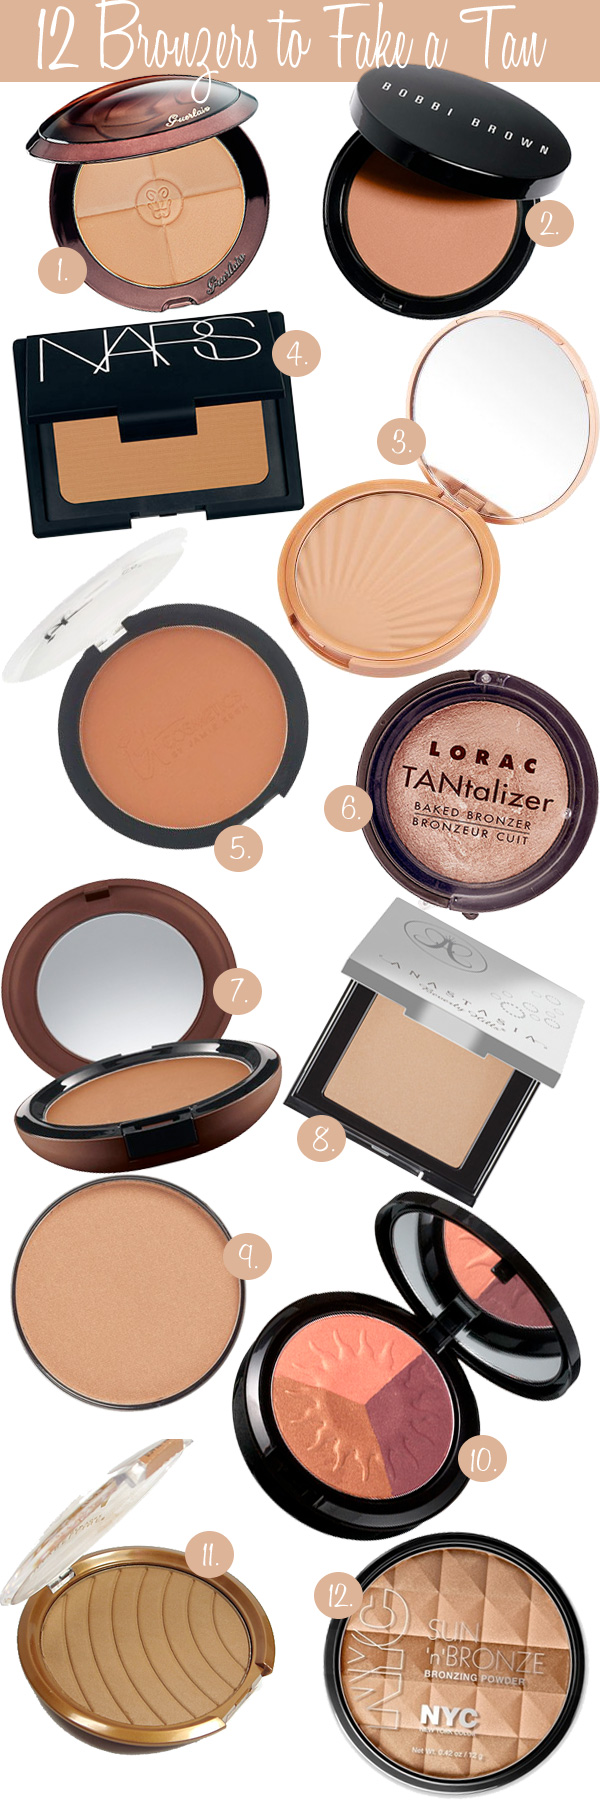 Best Bronzers to Fake a Tan